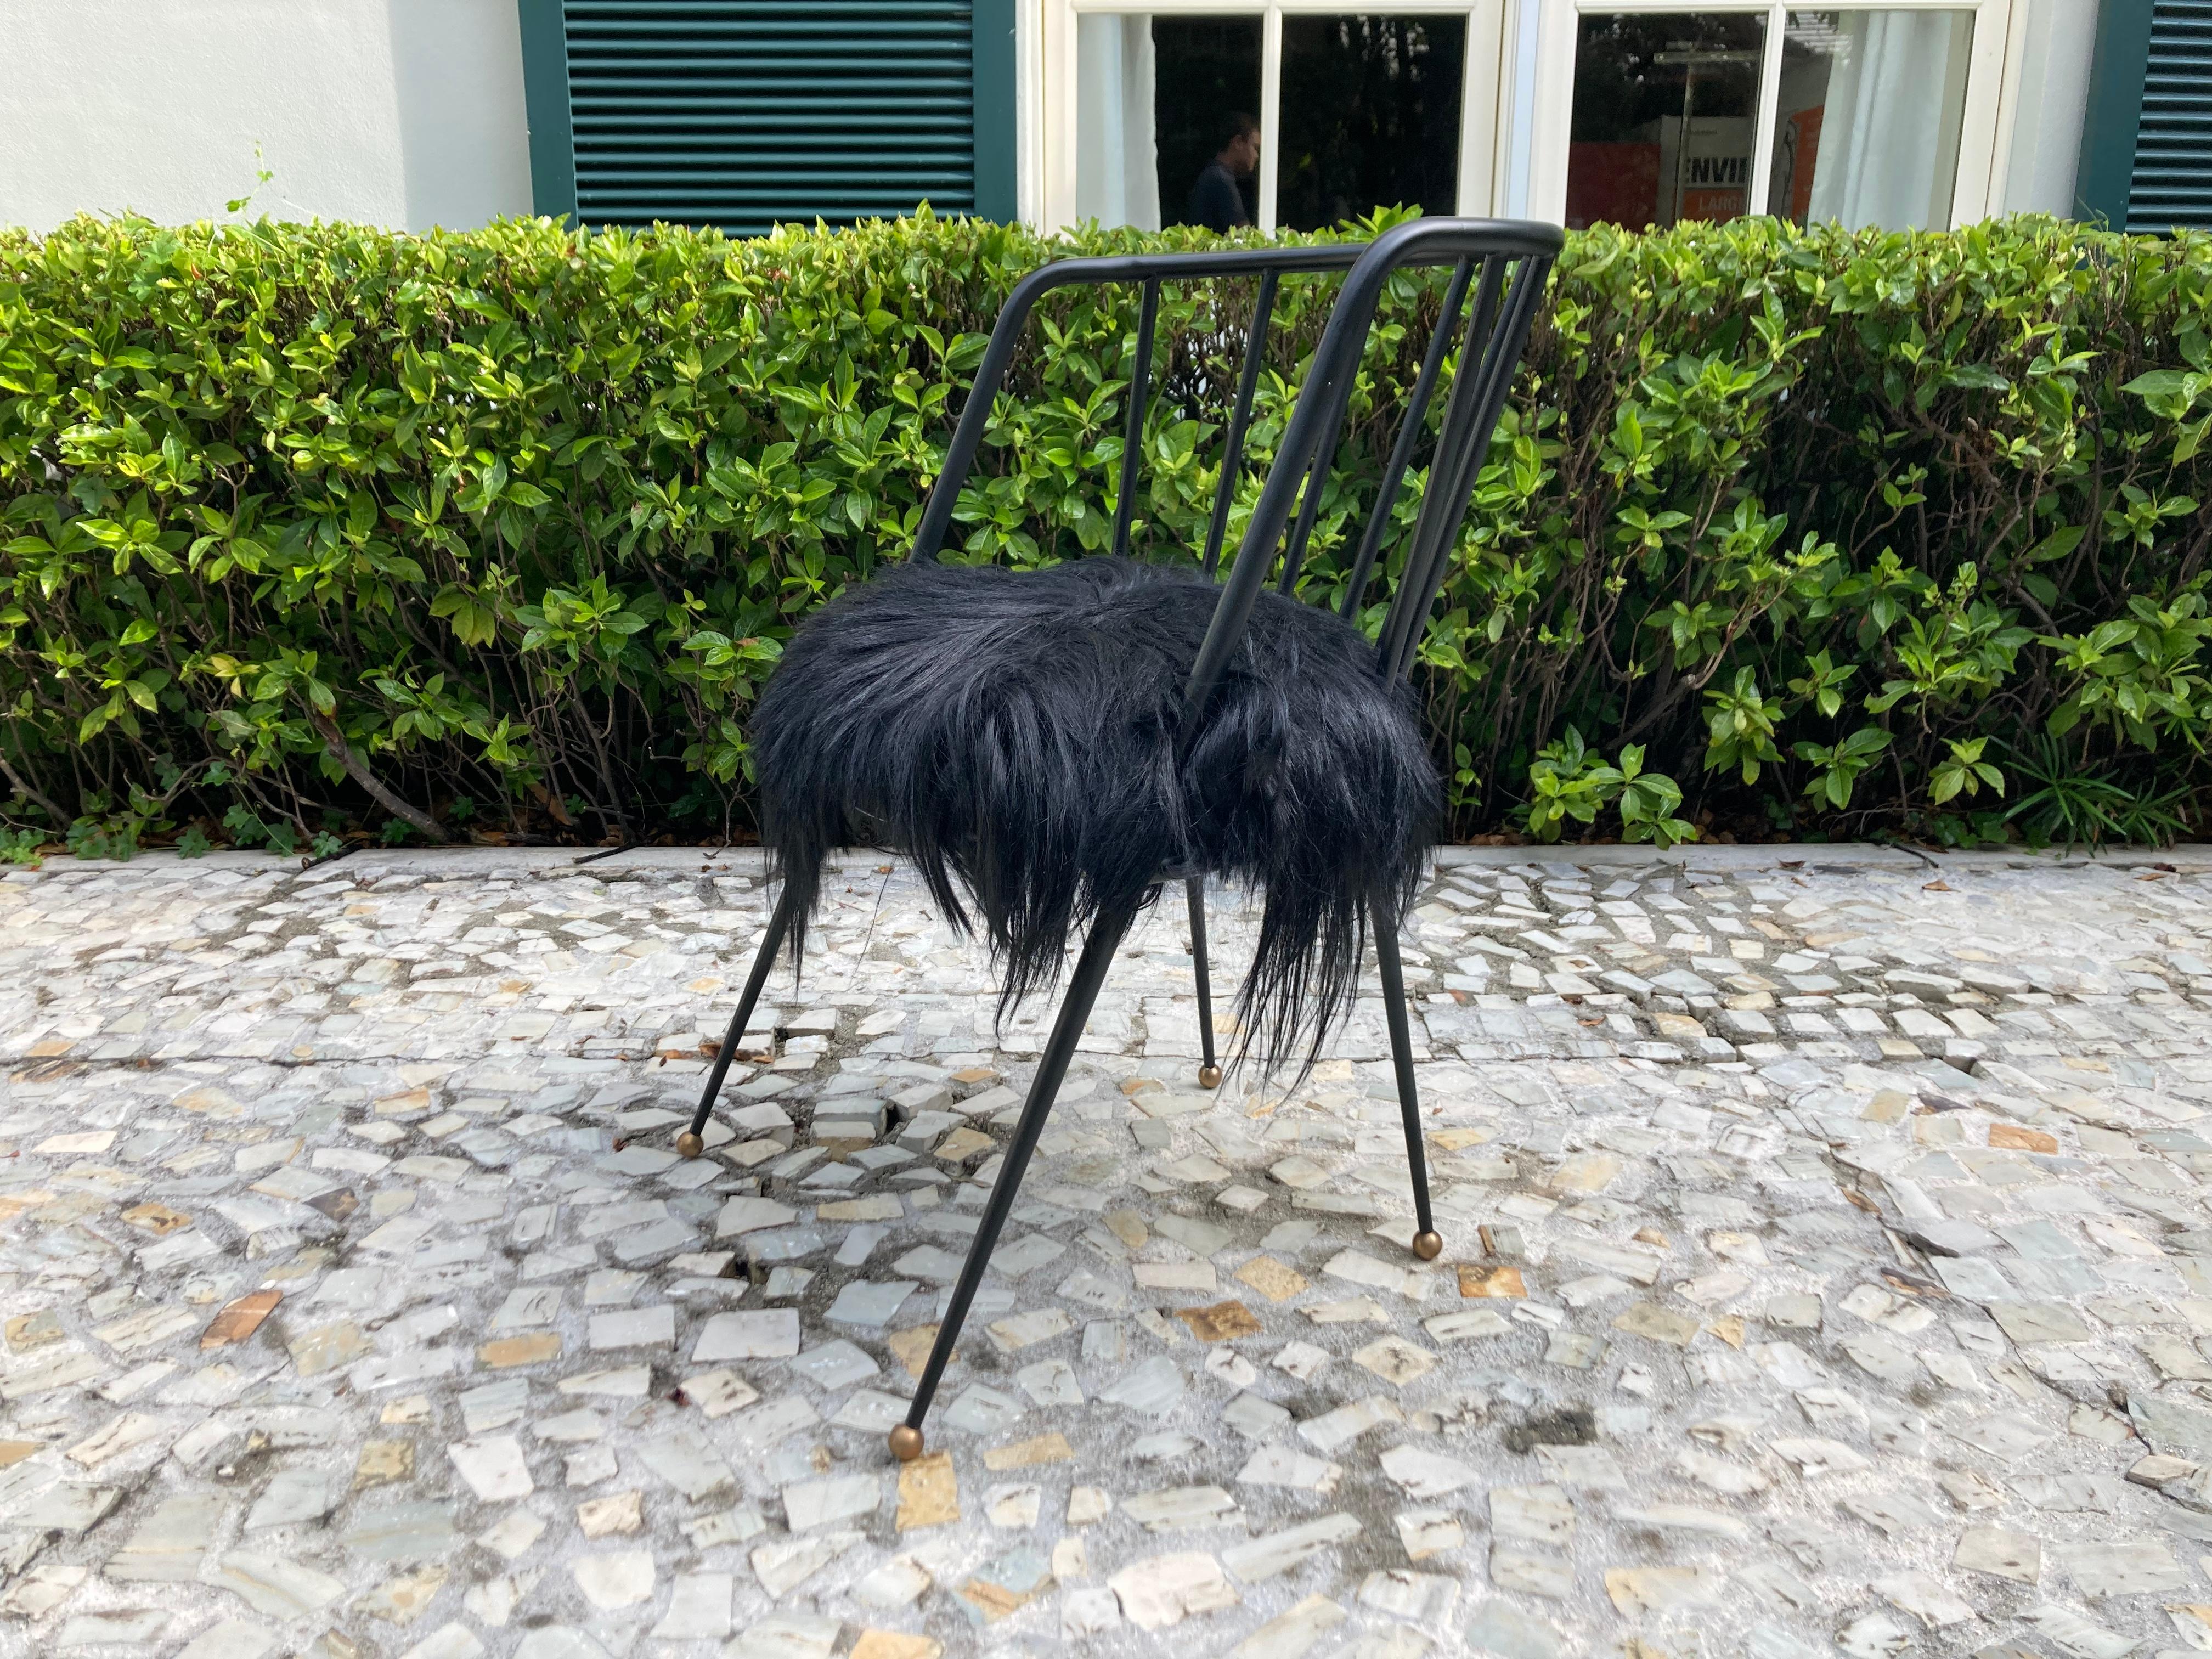 Malibu chair by Kelly Wearstler, hollow steel and finished with gunmetal coating. The tapered legs are tipped with antique brass ball feet. Seat is Black Goat fur.